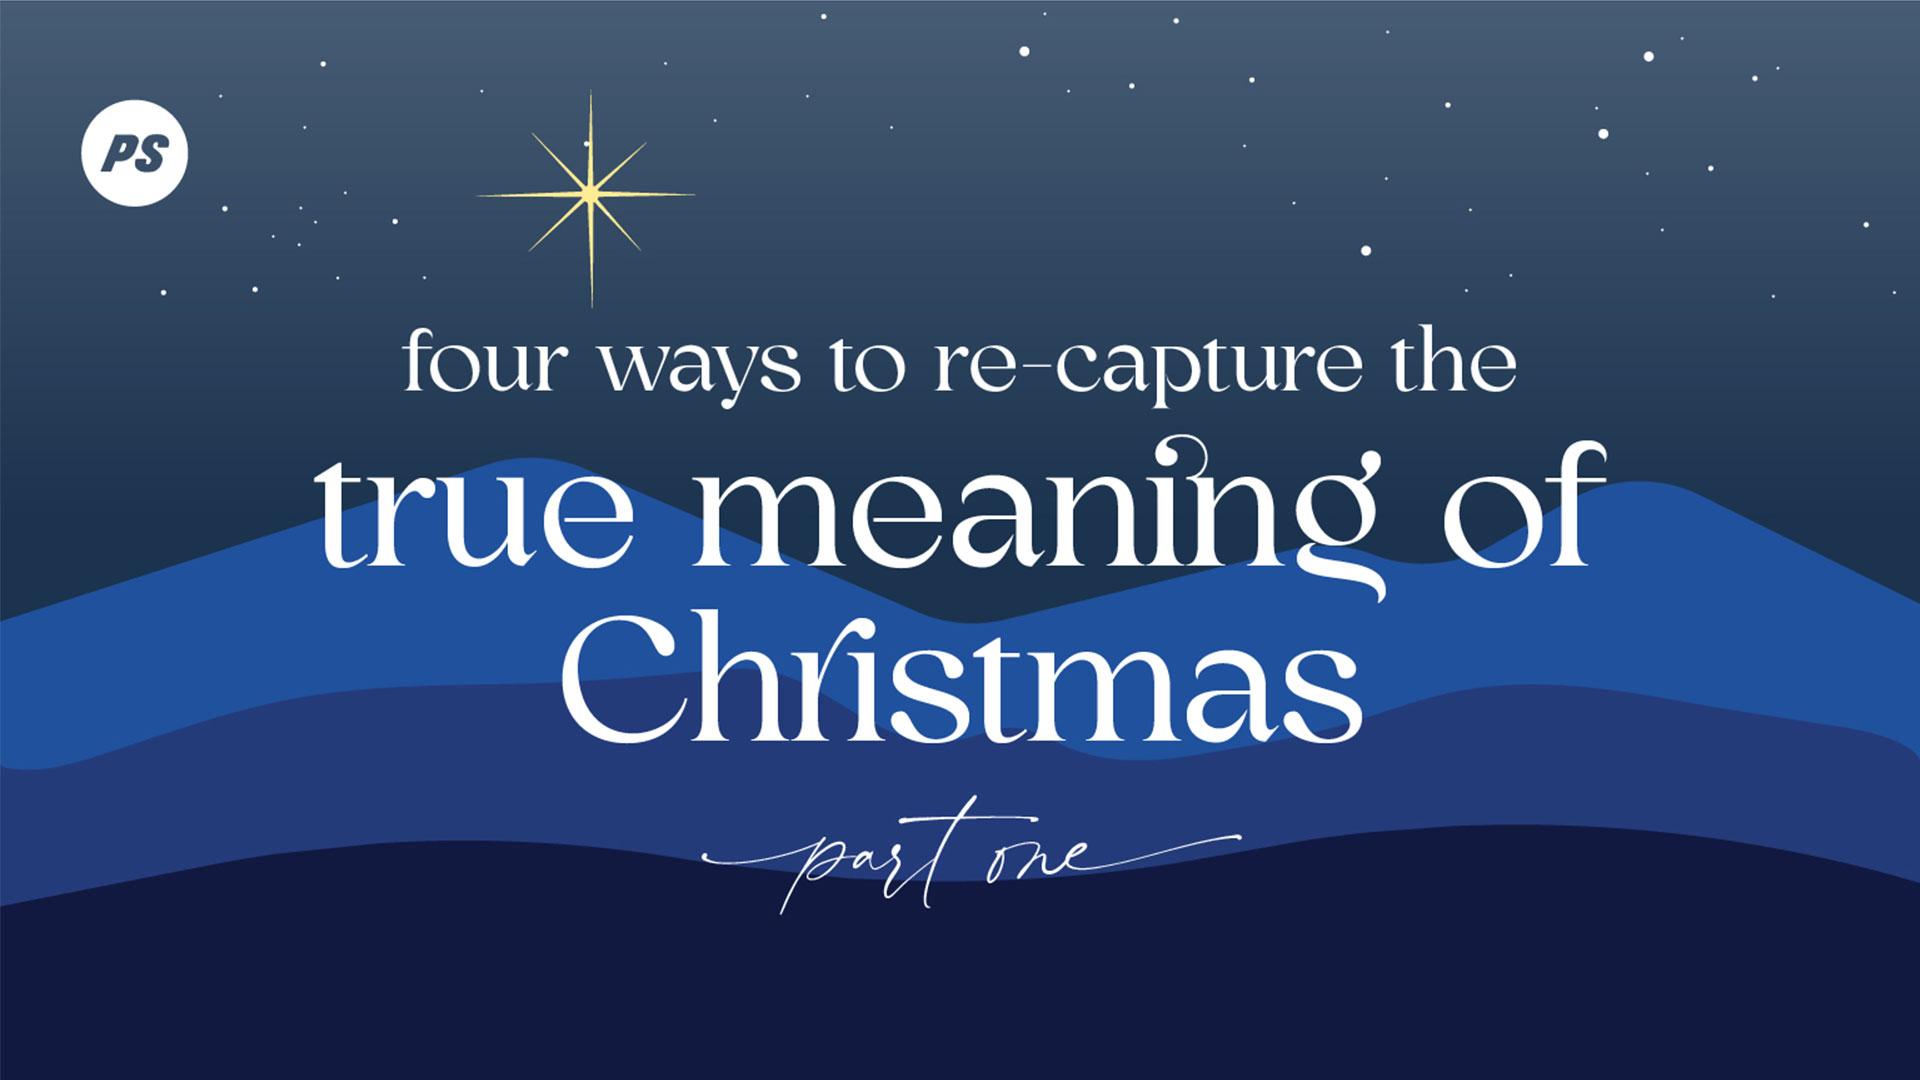 Featured Image for “4 Ways to Re-capture the True Meaning of Christmas”